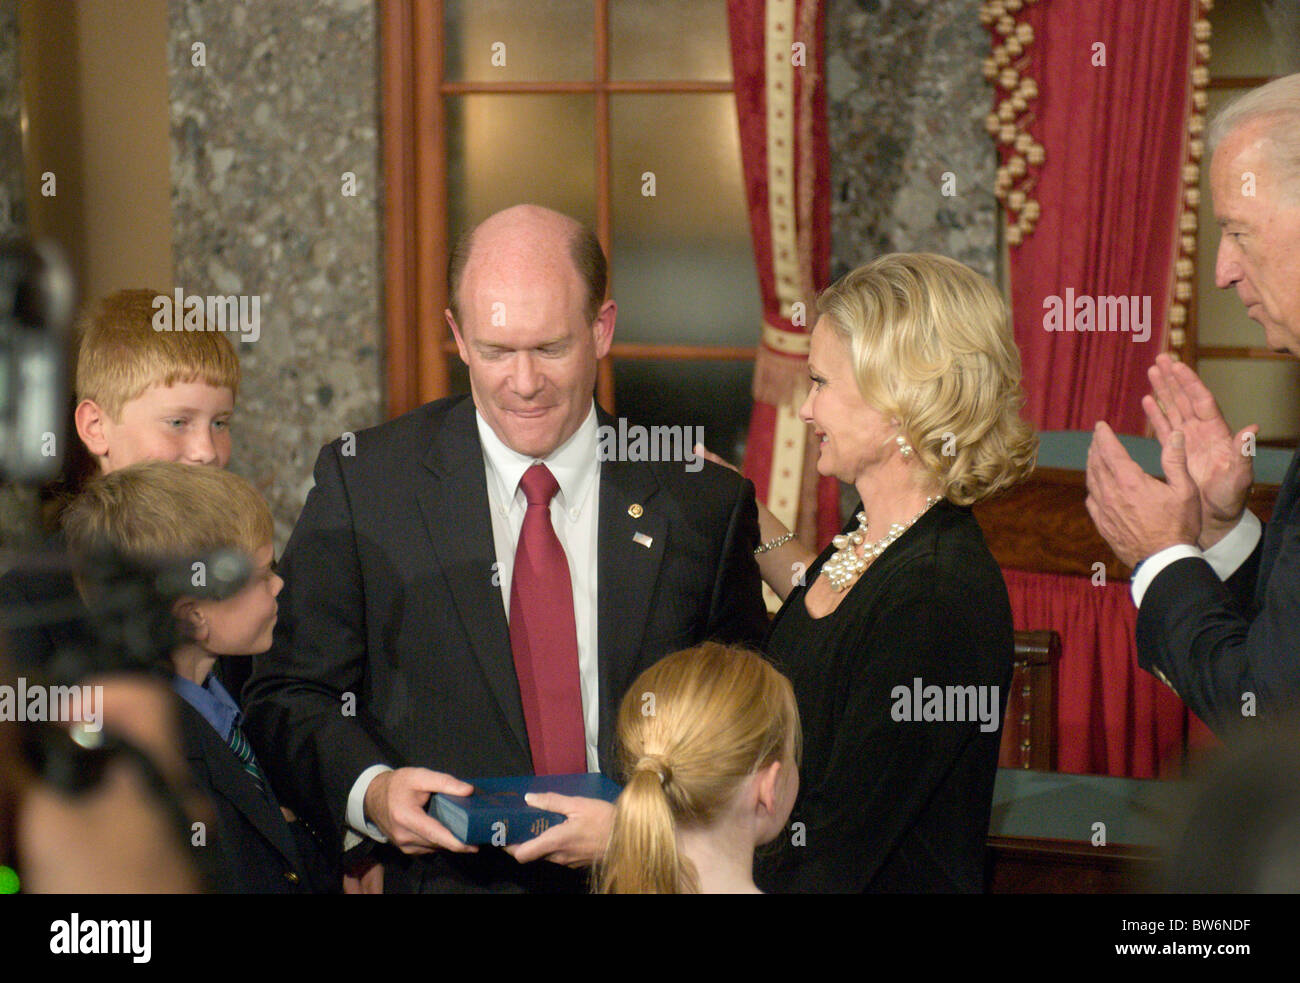 Vice President Joe Biden performed a ceremonial swearing-in of Sen. Chris Coons, D-Del., in the Capitol's Old Senate Chamber on Stock Photo